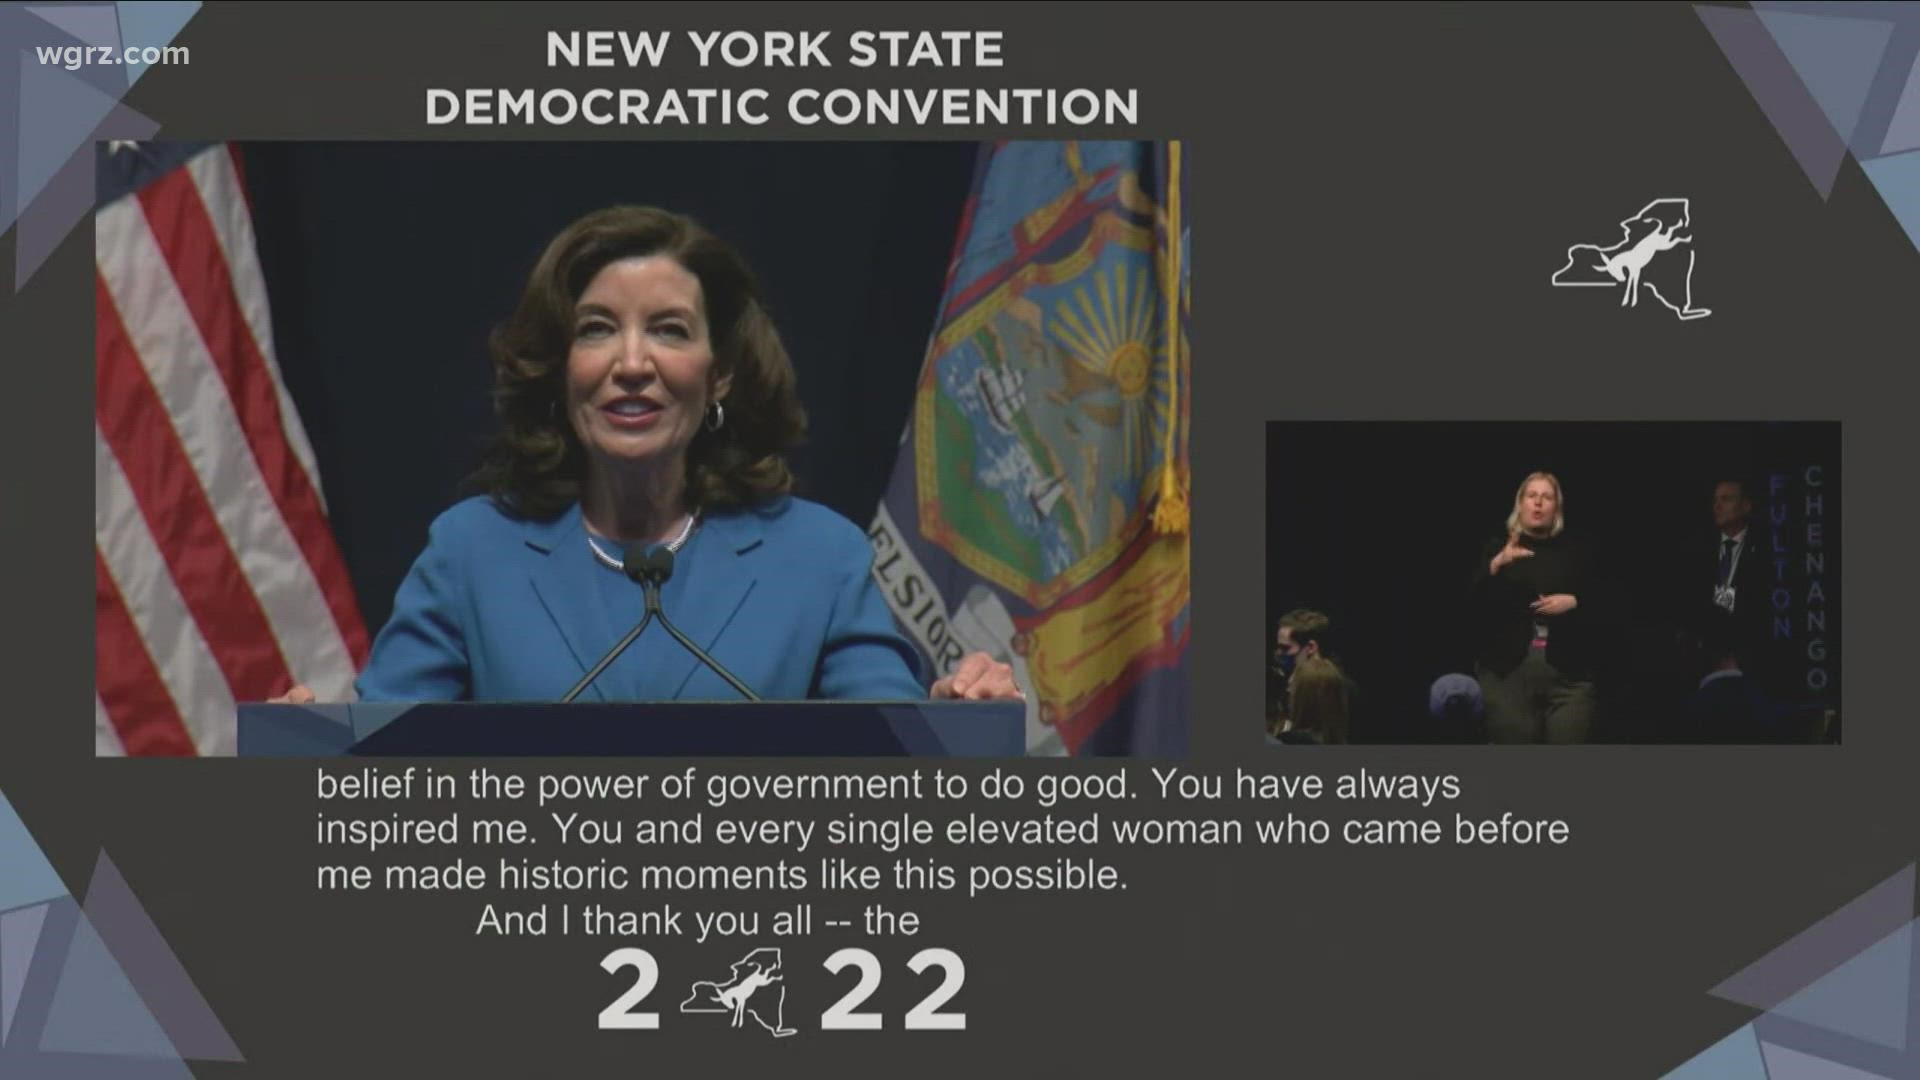 Govenor Kathy Hochul officially accepts the Democratic nomination for governor.
She received 85-percent of the vote from delegates.